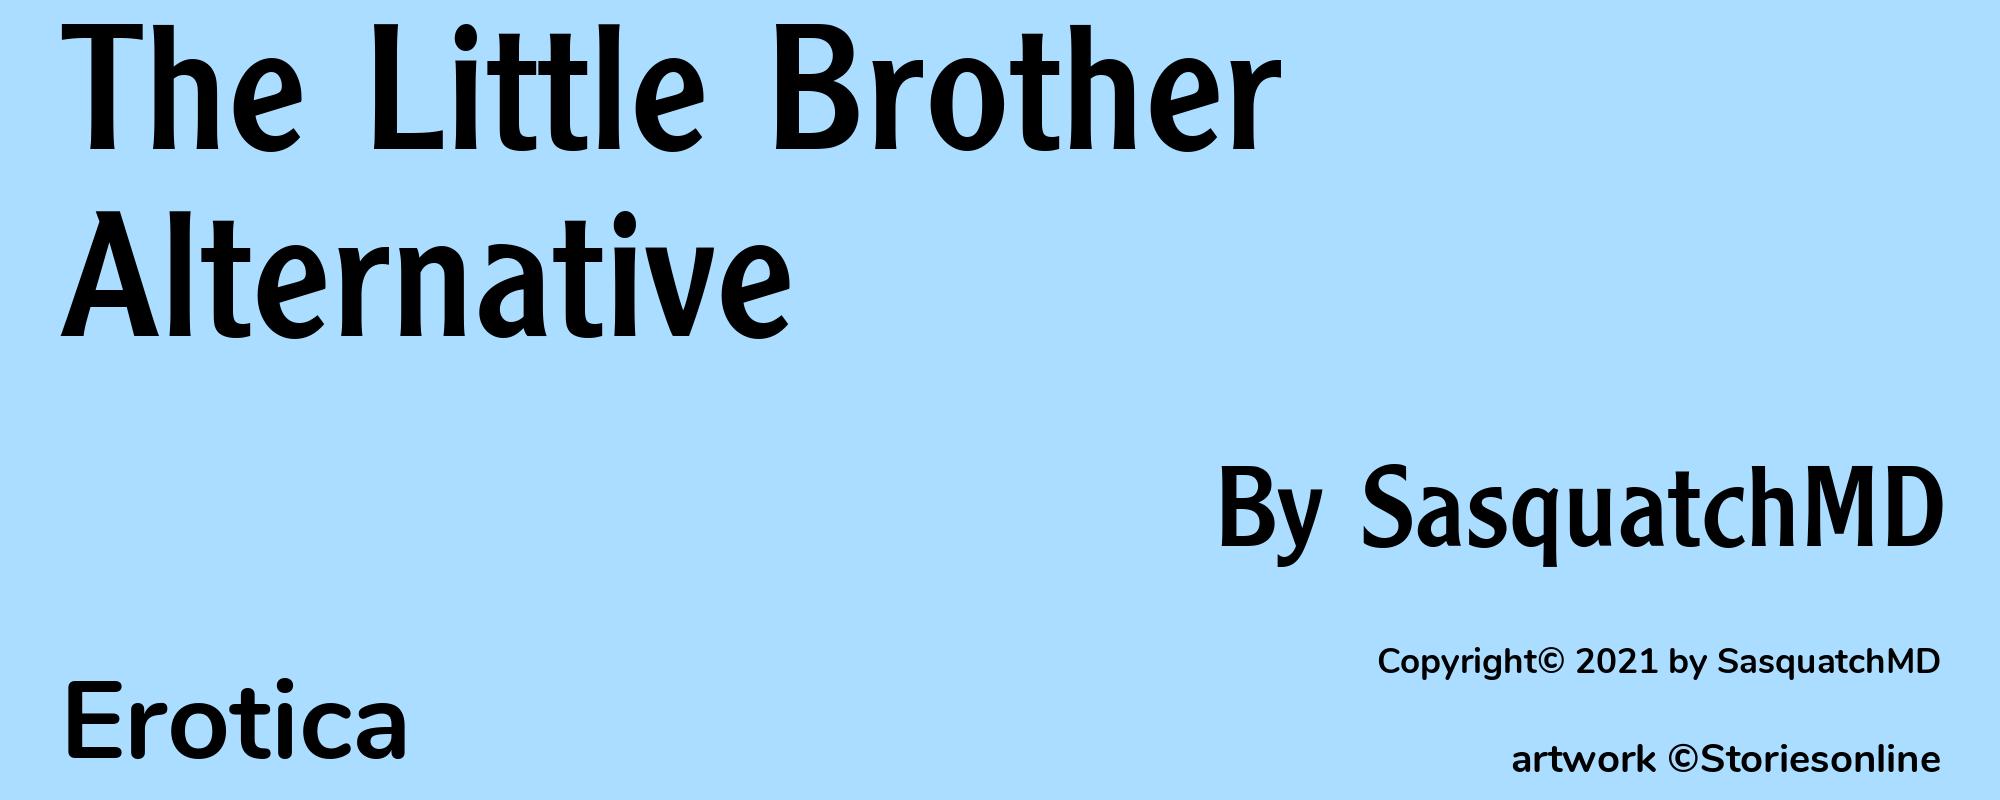 The Little Brother Alternative - Cover